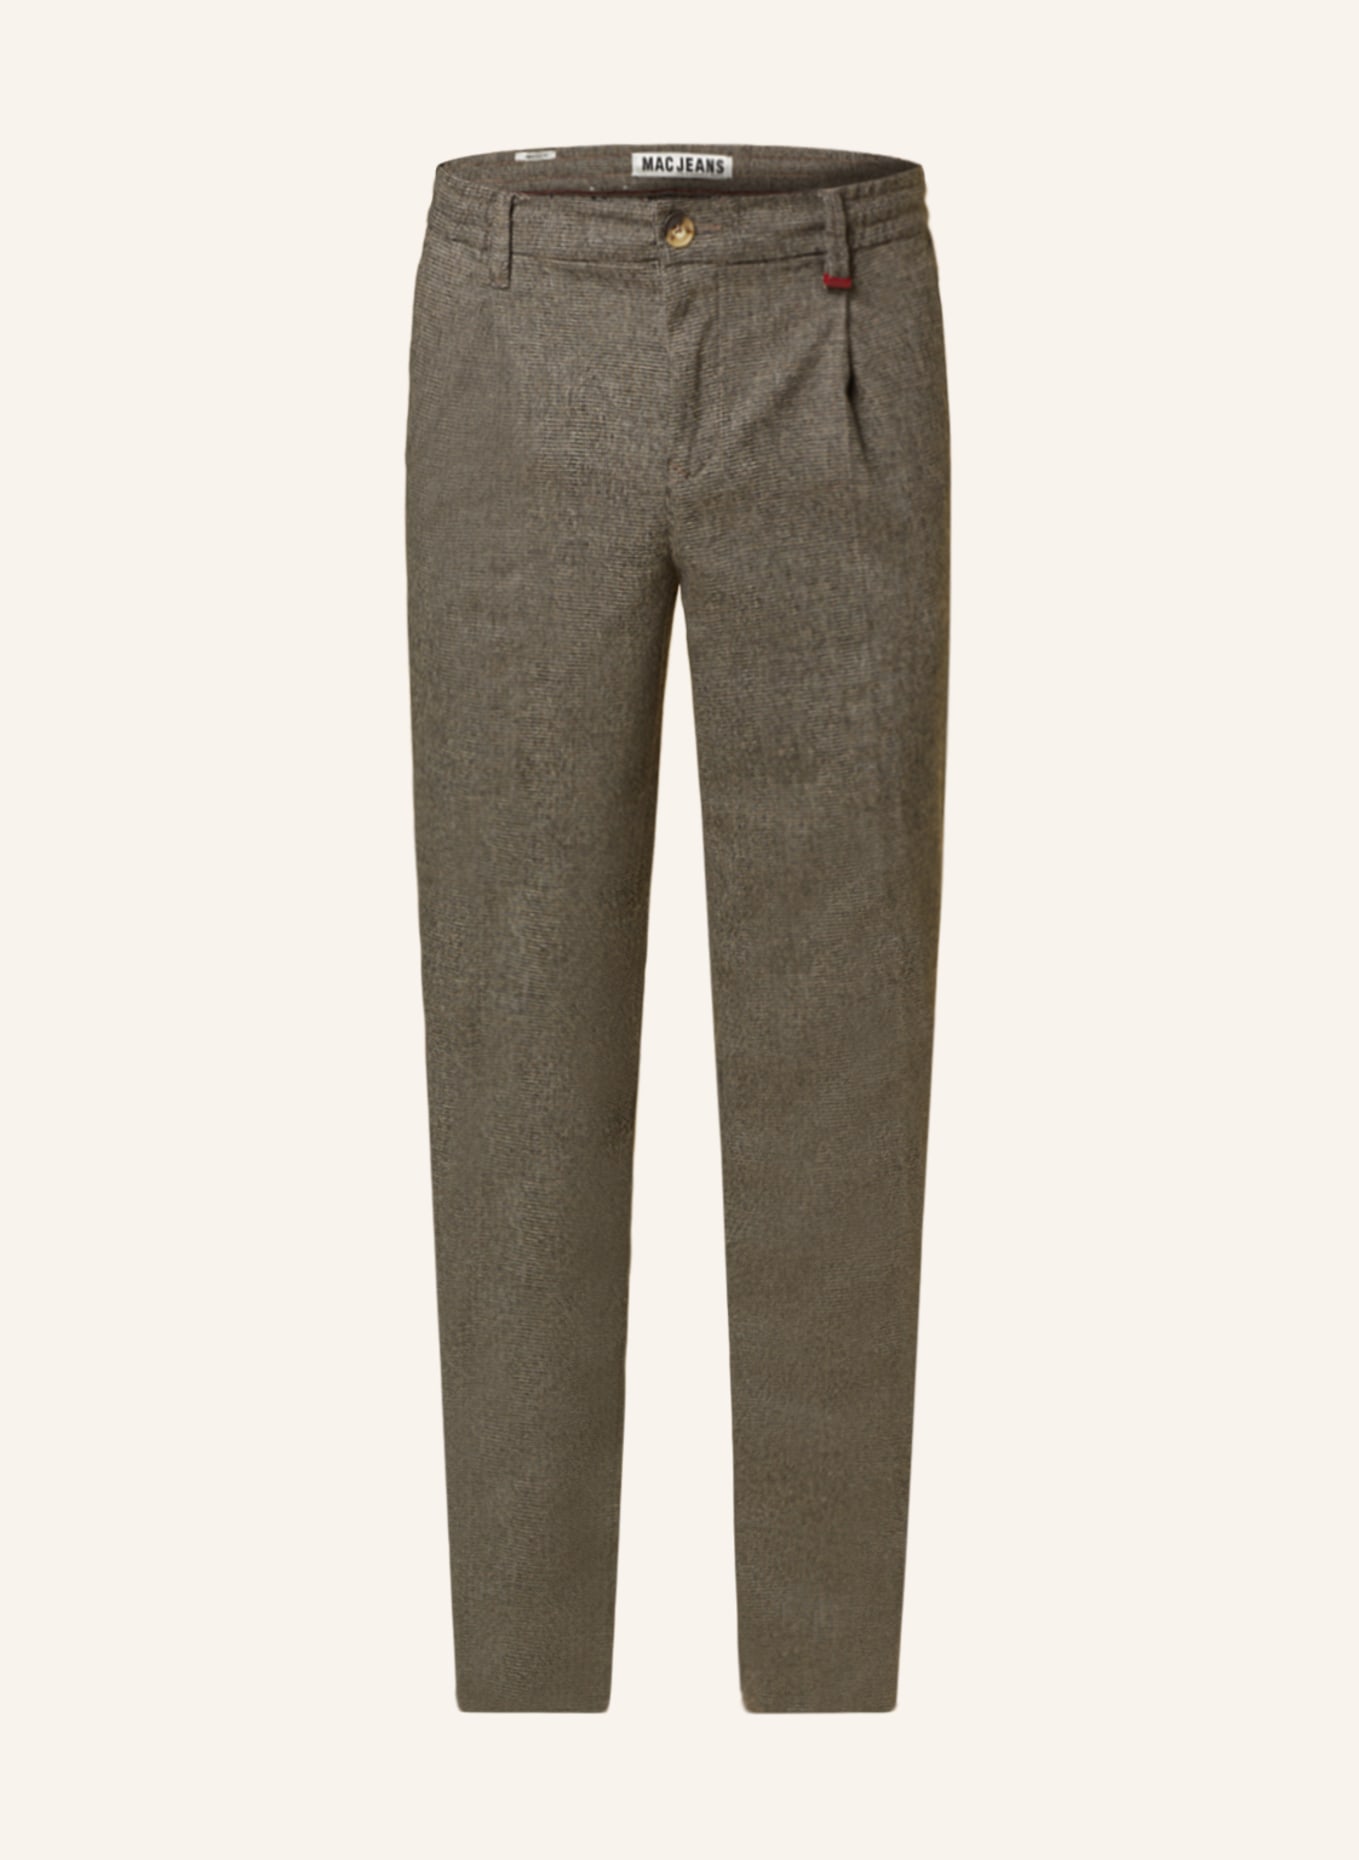 MAC Trousers tapered fit, Color: 237P Light greige pepita (Image 1)